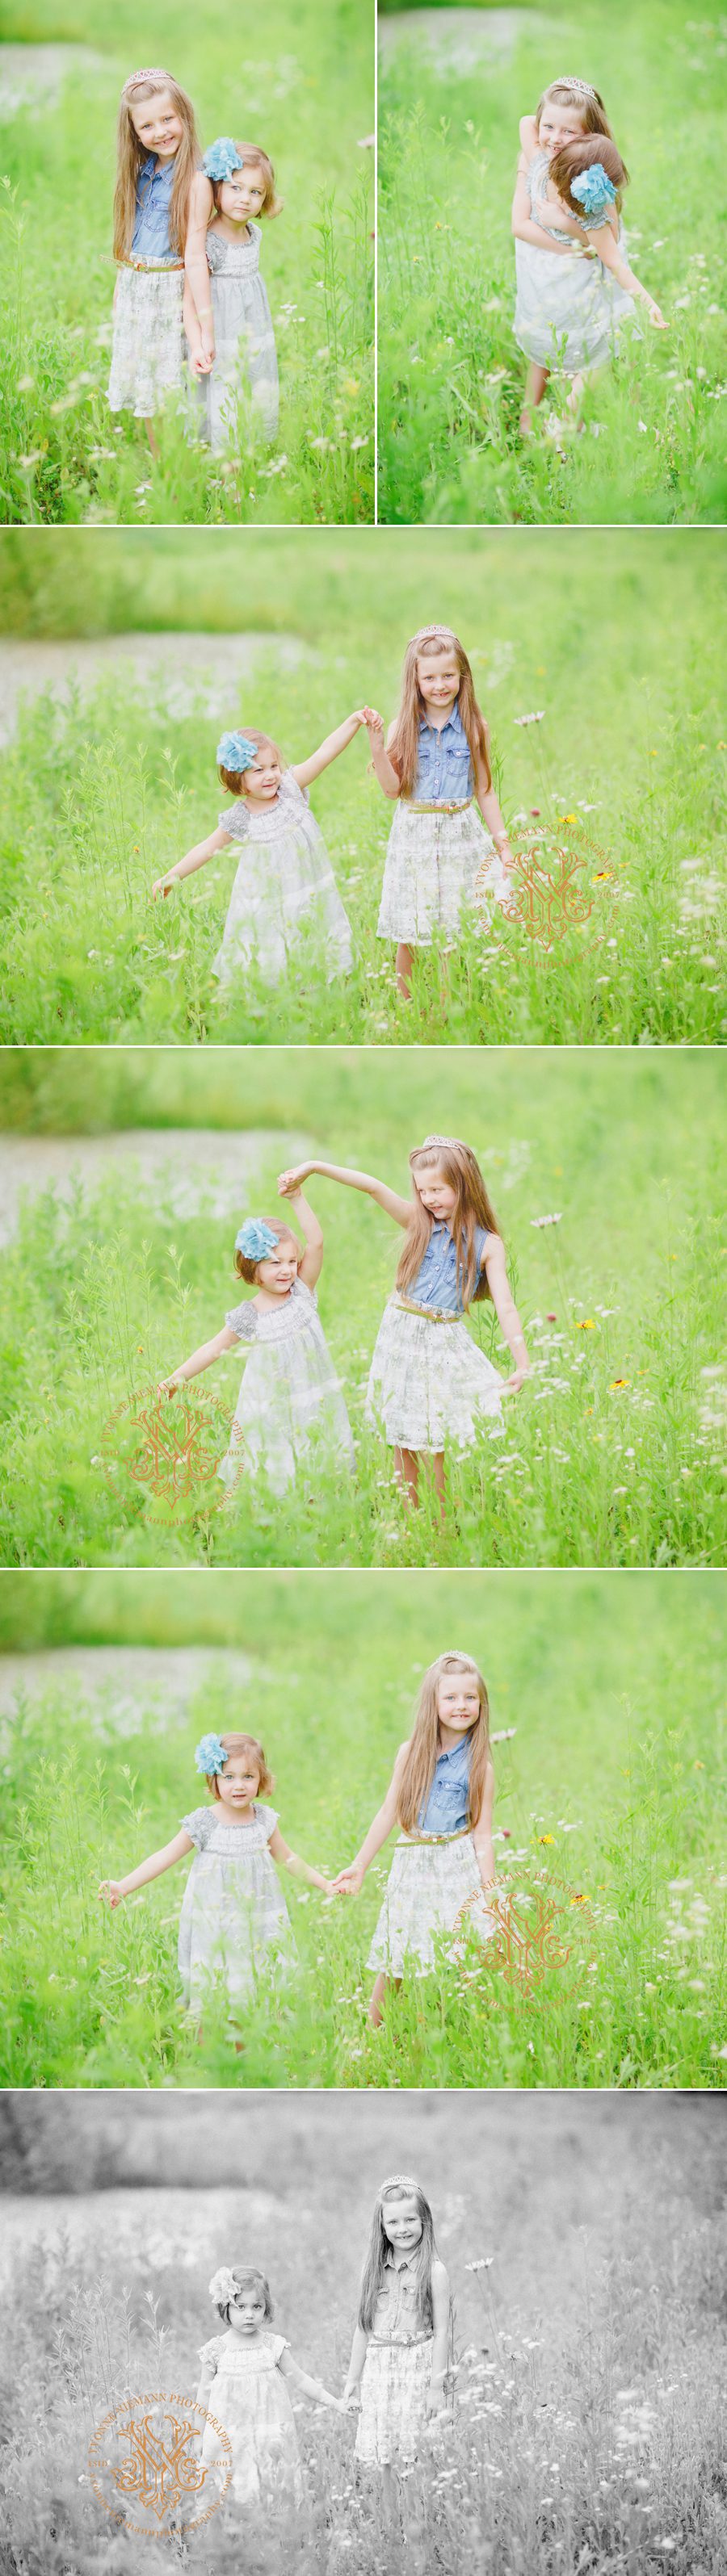 Fun photos of two sisters playing in a field in Athens, GA area.